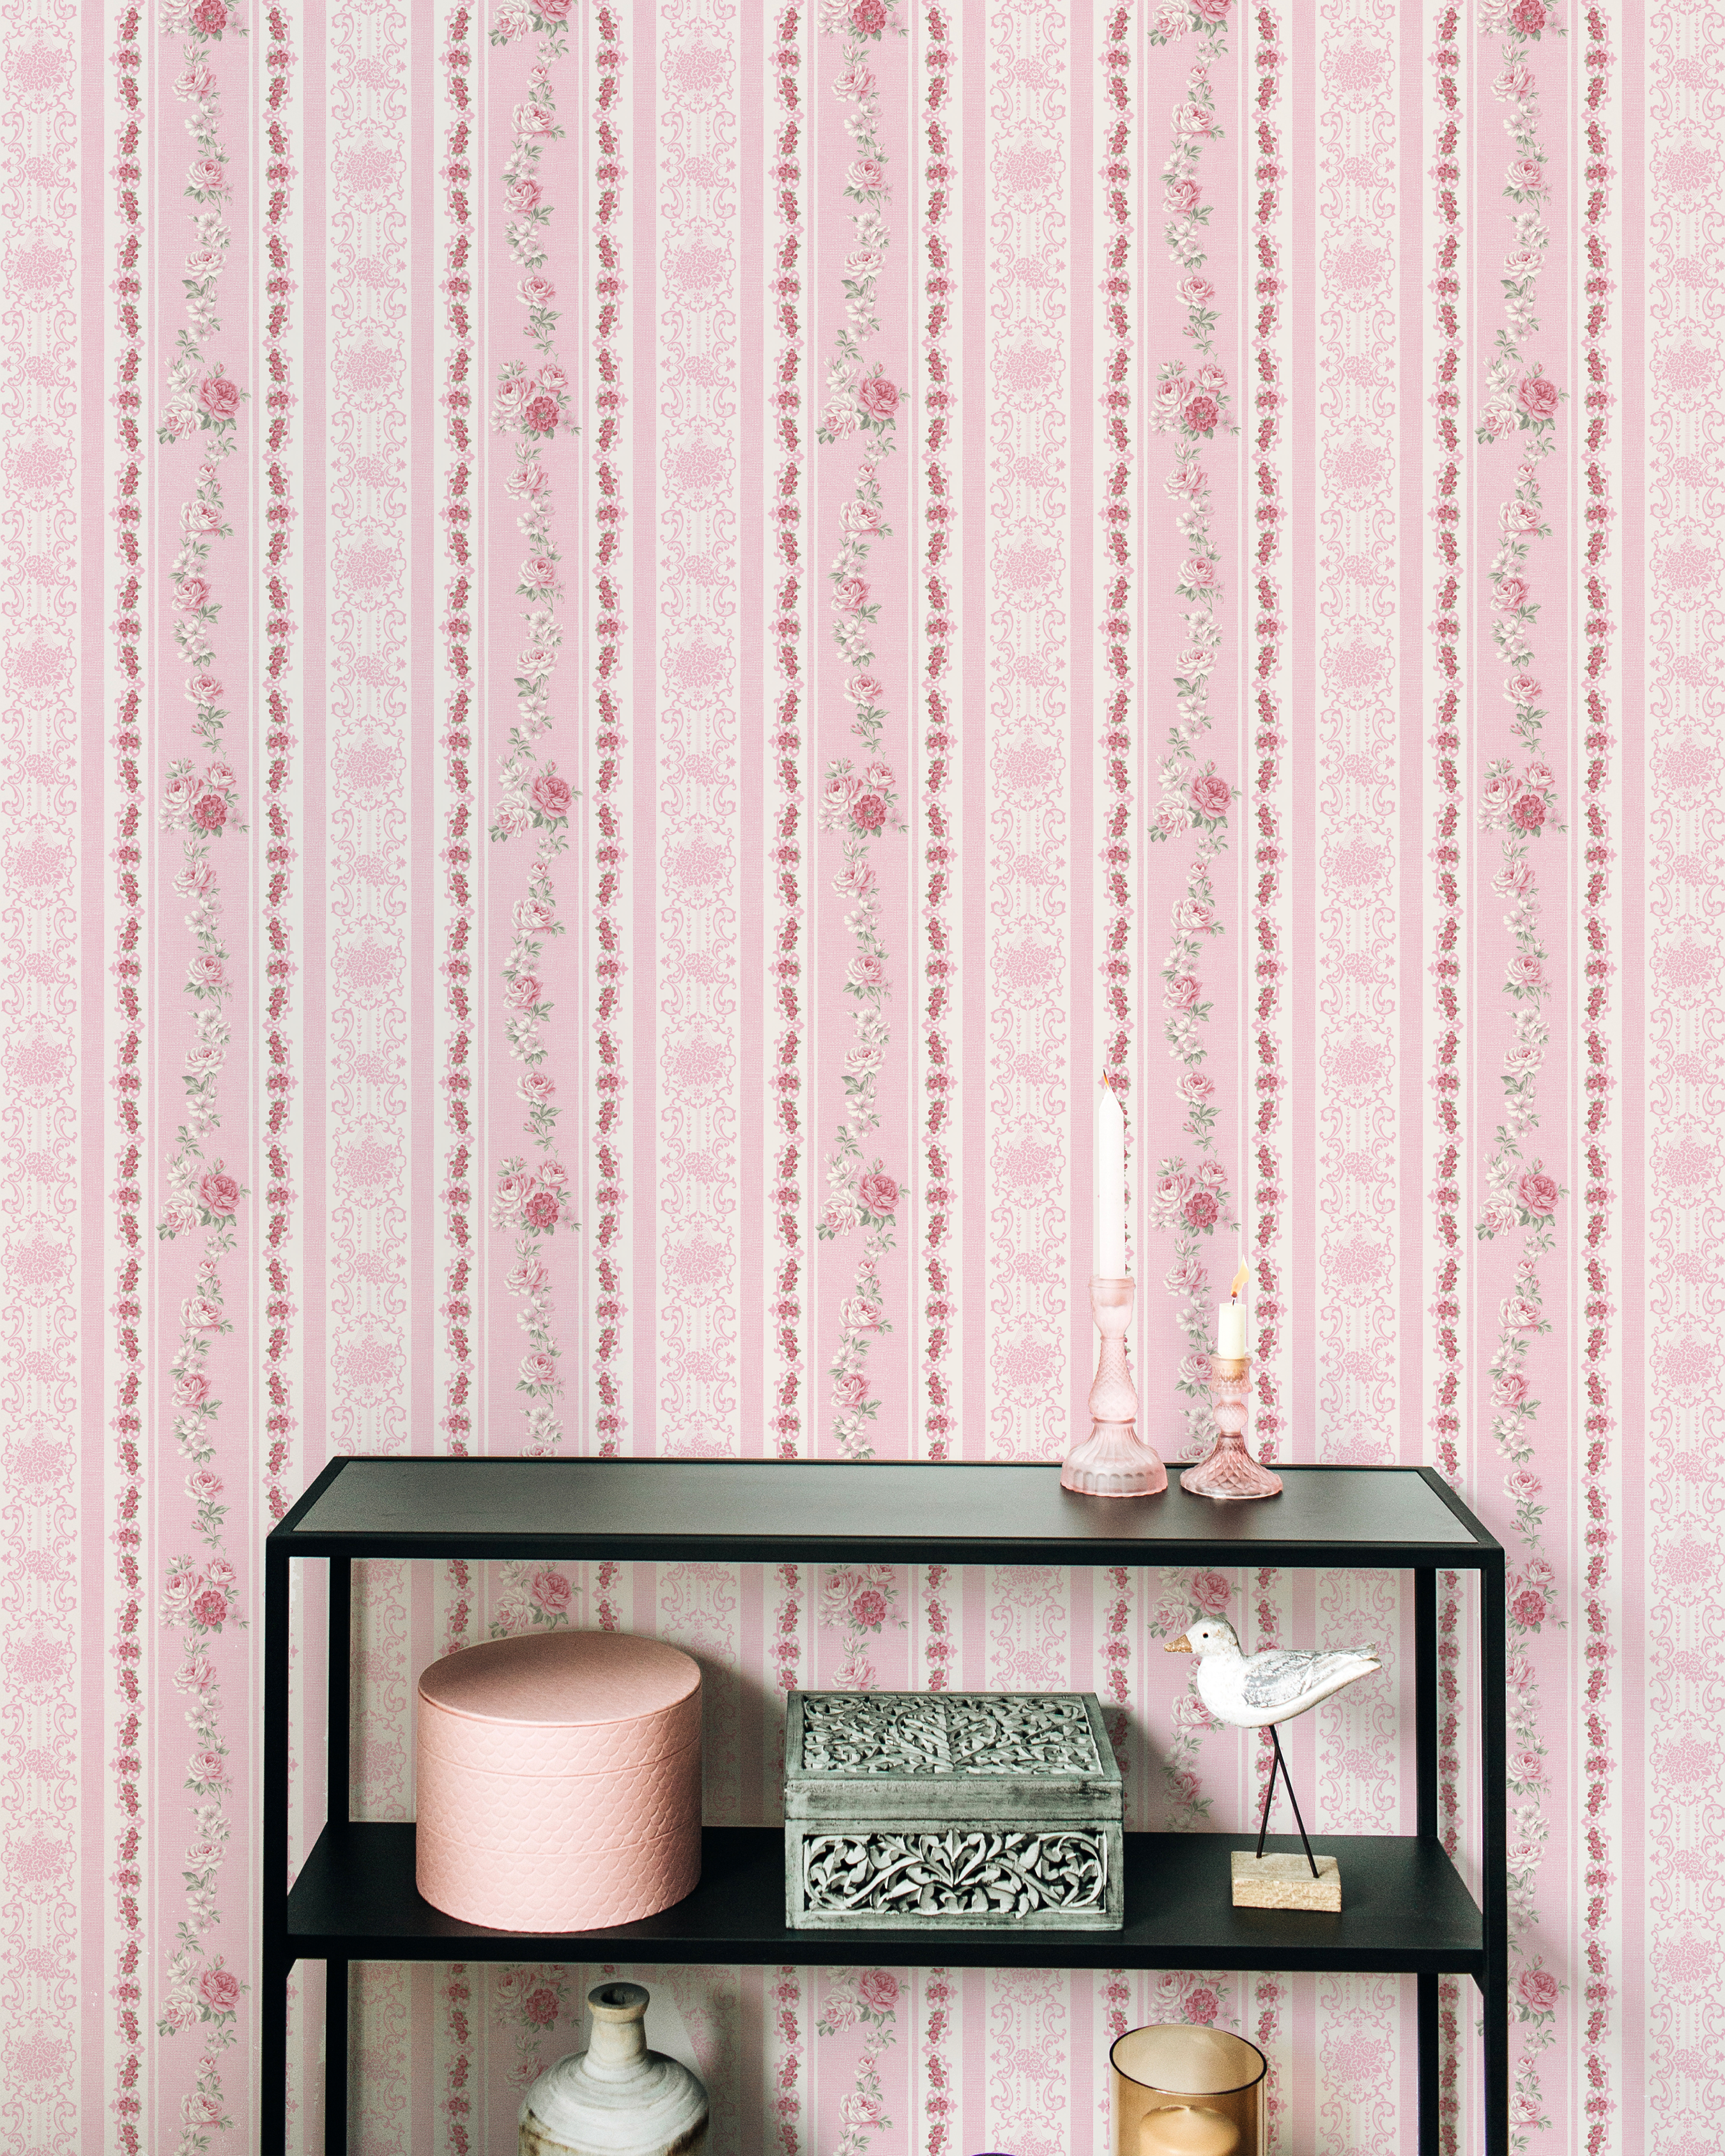 Interior scene decorated with Vintage Rose Wallpaper, featuring a modern black shelving unit against the floral and striped pink wallpaper. The shelf is styled with various decorative items including a pink box, a vintage bird figure, and pastel-colored vases.